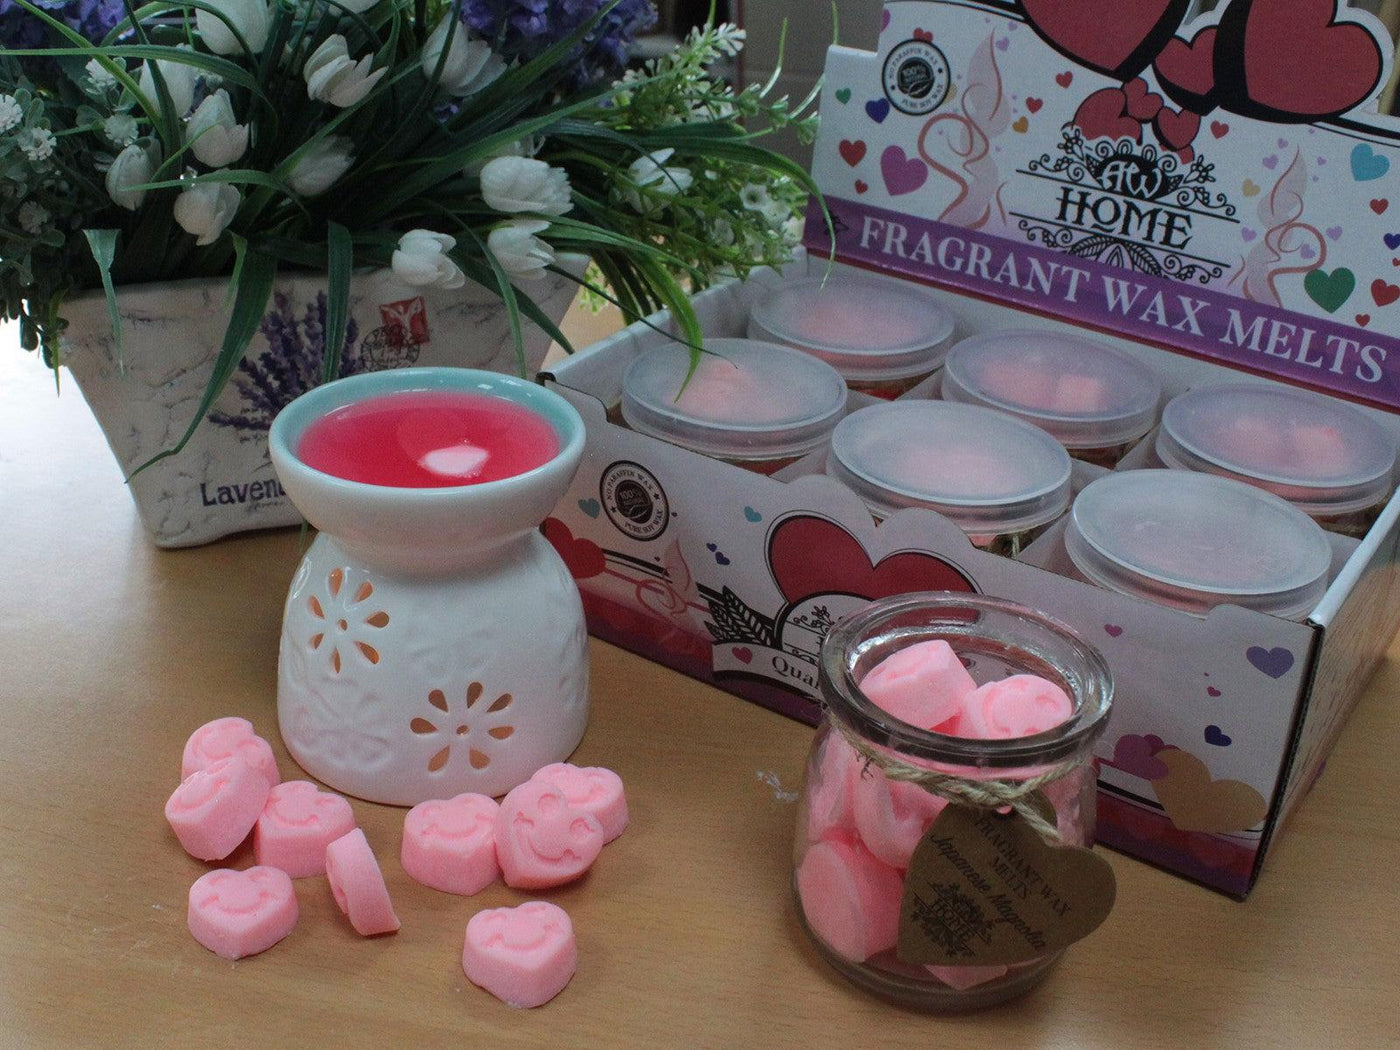 Natural Soy Fragrance Oil Heart Wax Melts - Classic Rose.